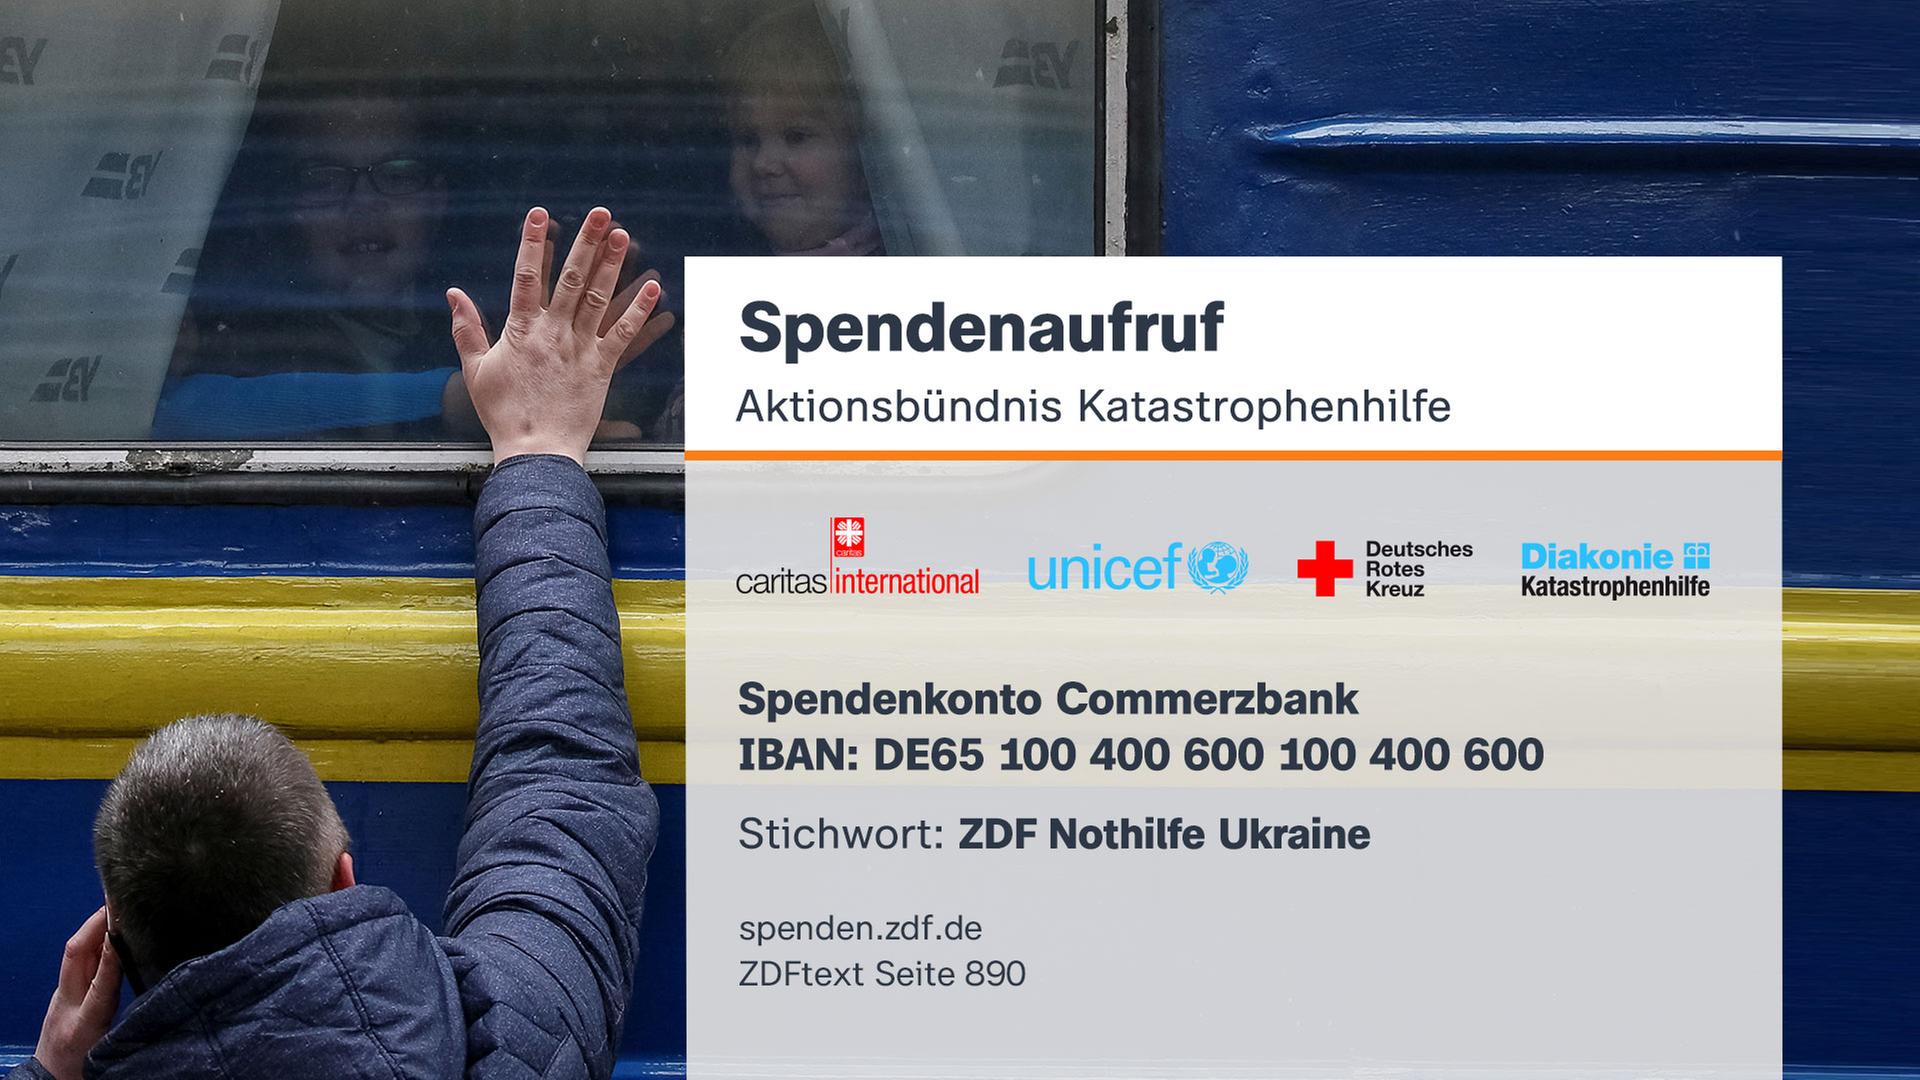 "Call for Donations: Action Alliance for Disaster Relief | Donation account: Commerzbank | IBAN: DE65 100 400 600 100 400 600 | BIC: COBADEFFXXX | Keyword: ZDF Nothilfe Ukraine"